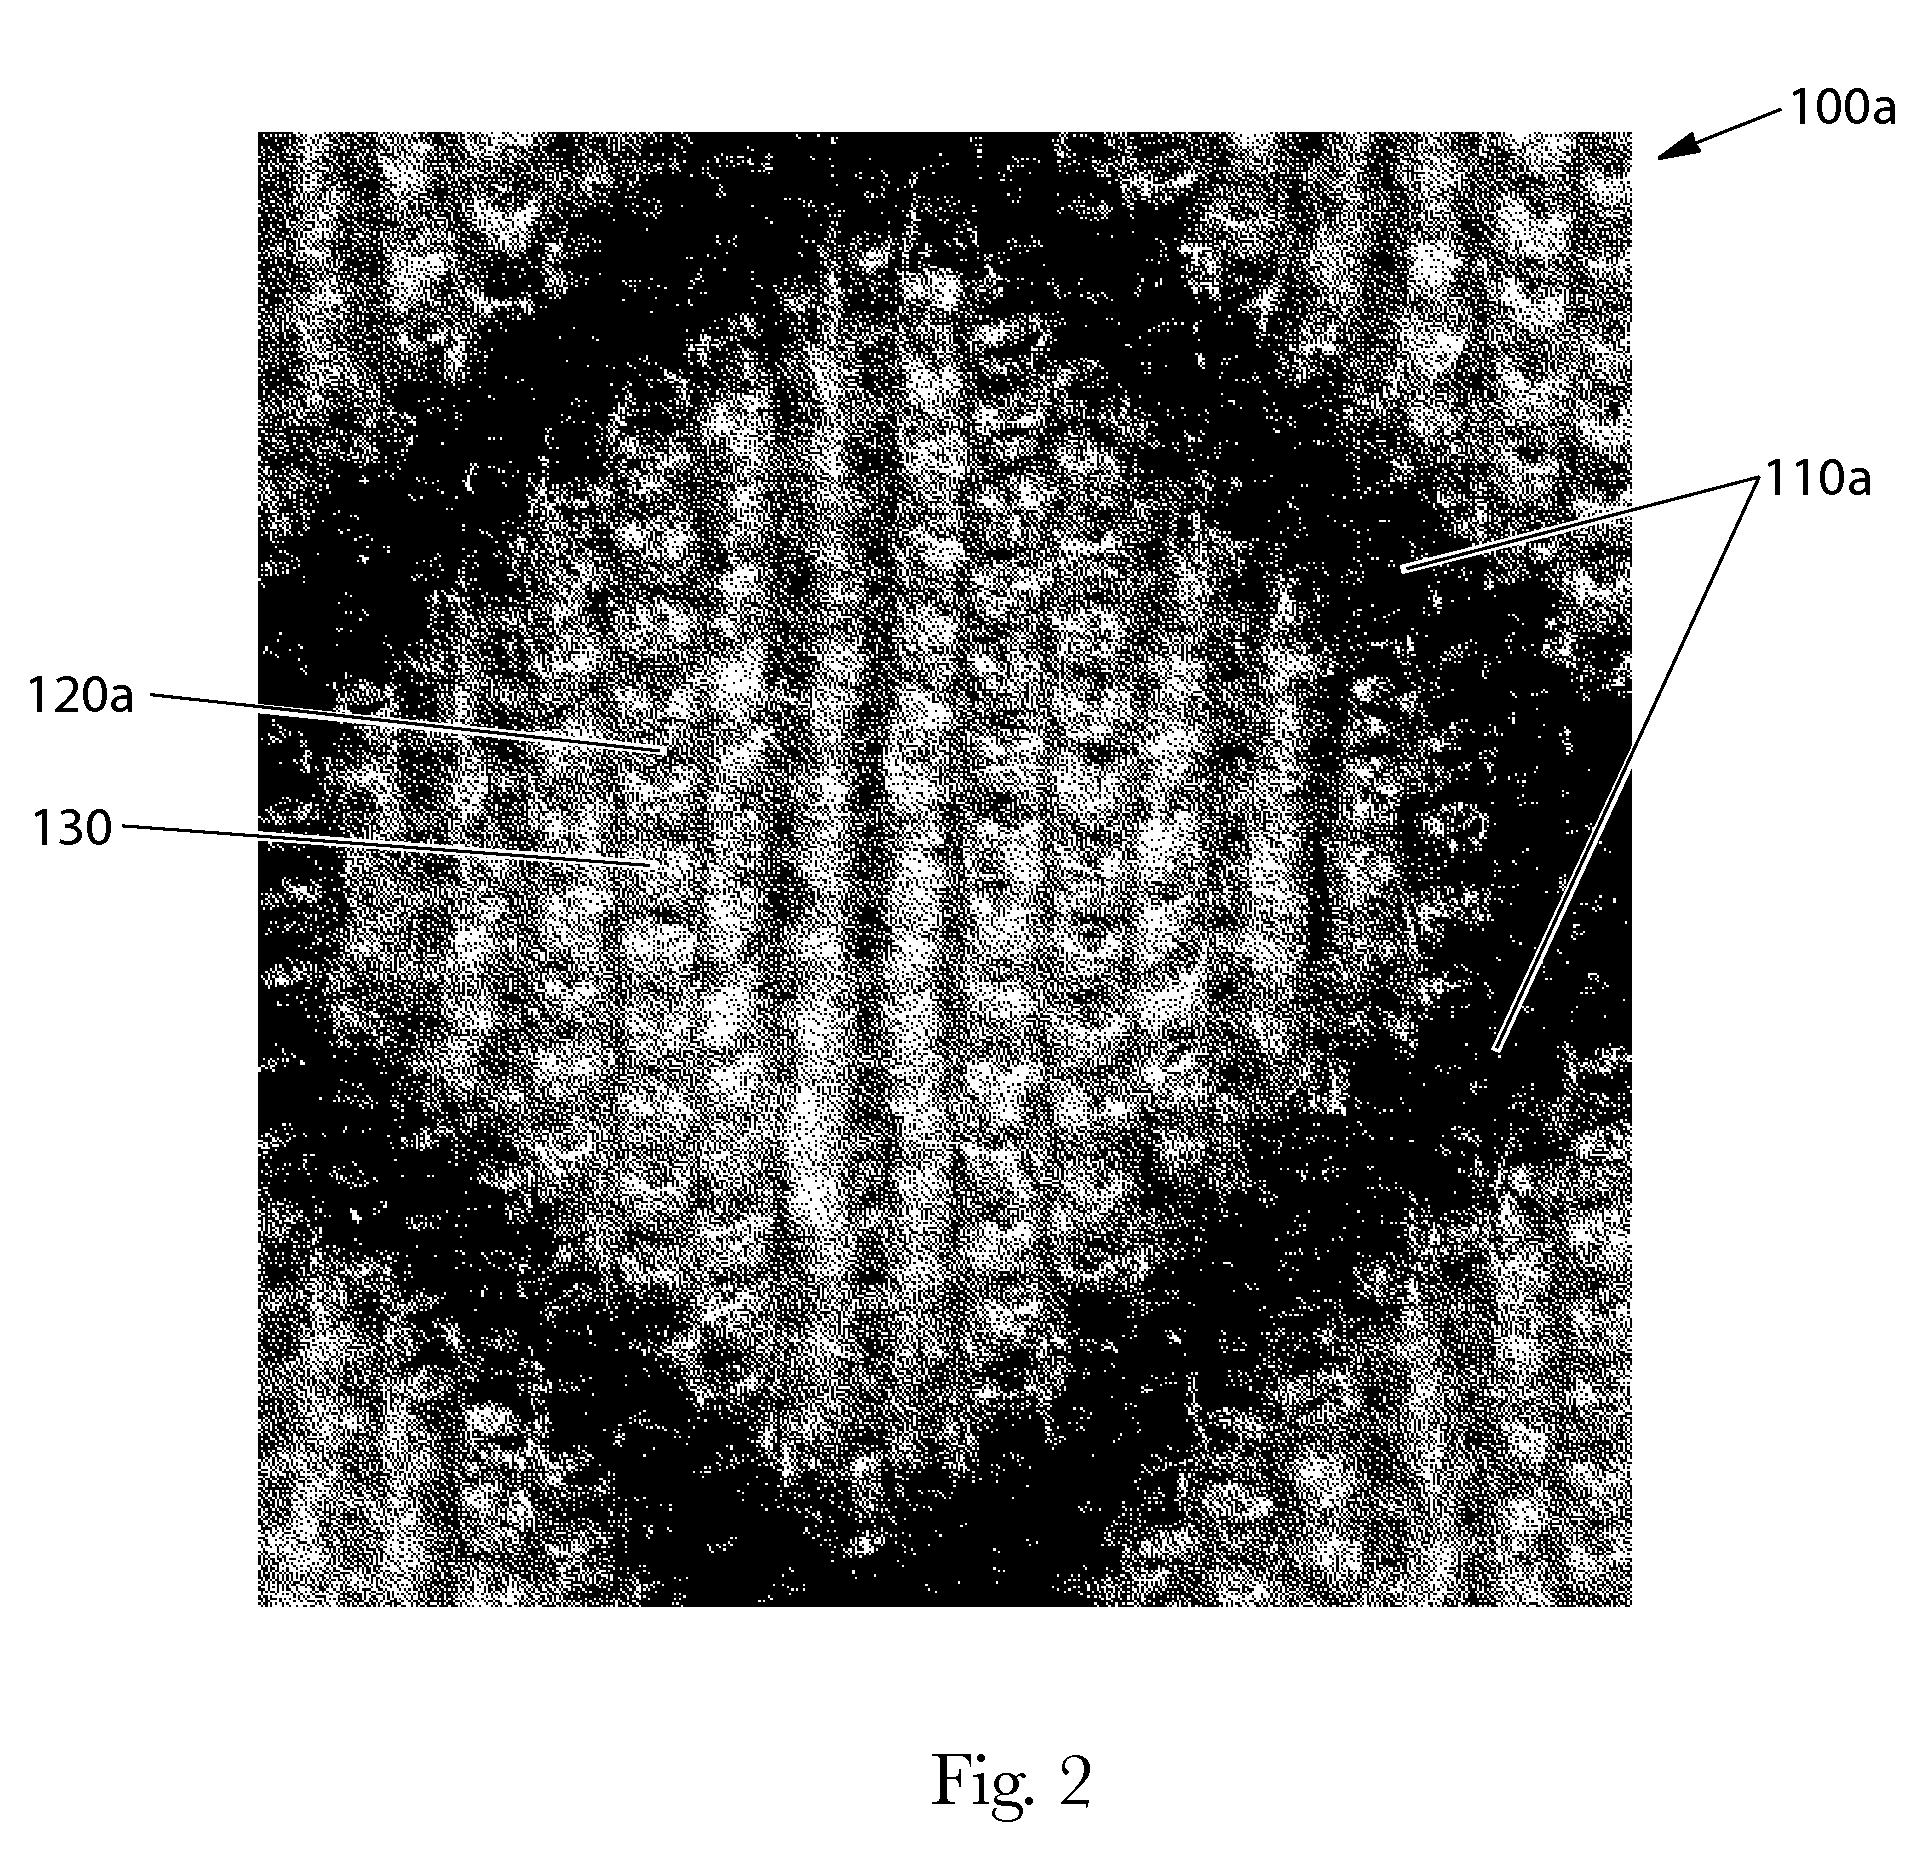 Method of Producing a Web Substrate Having Activated Color Regions in Deformed Regions